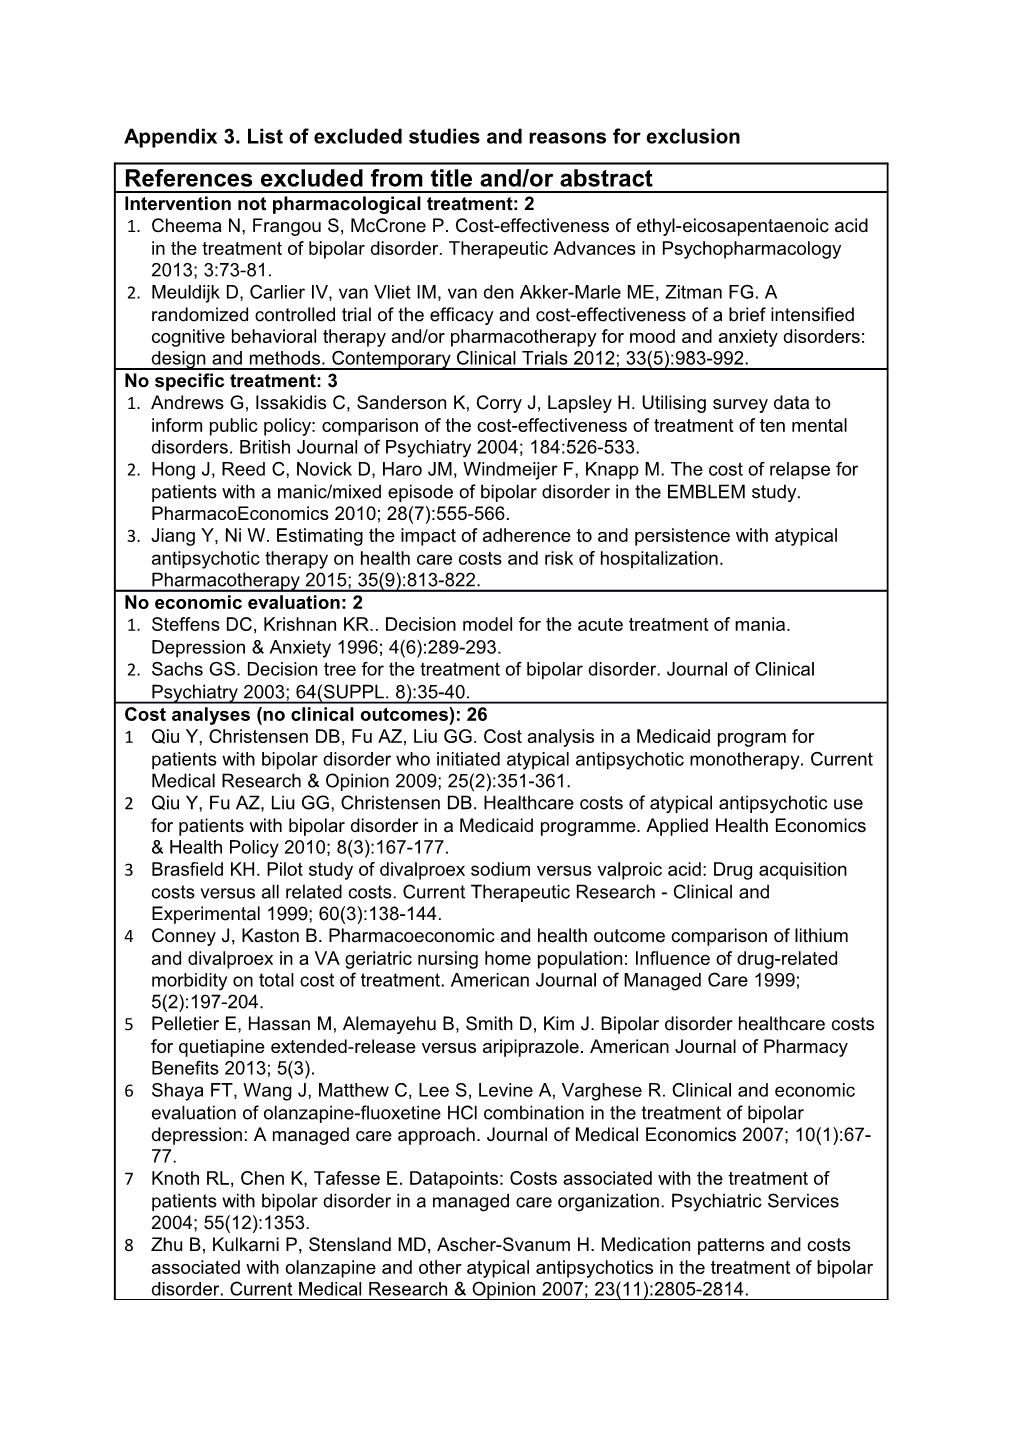 Appendix 3. List of Excluded Studies and Reasons for Exclusion